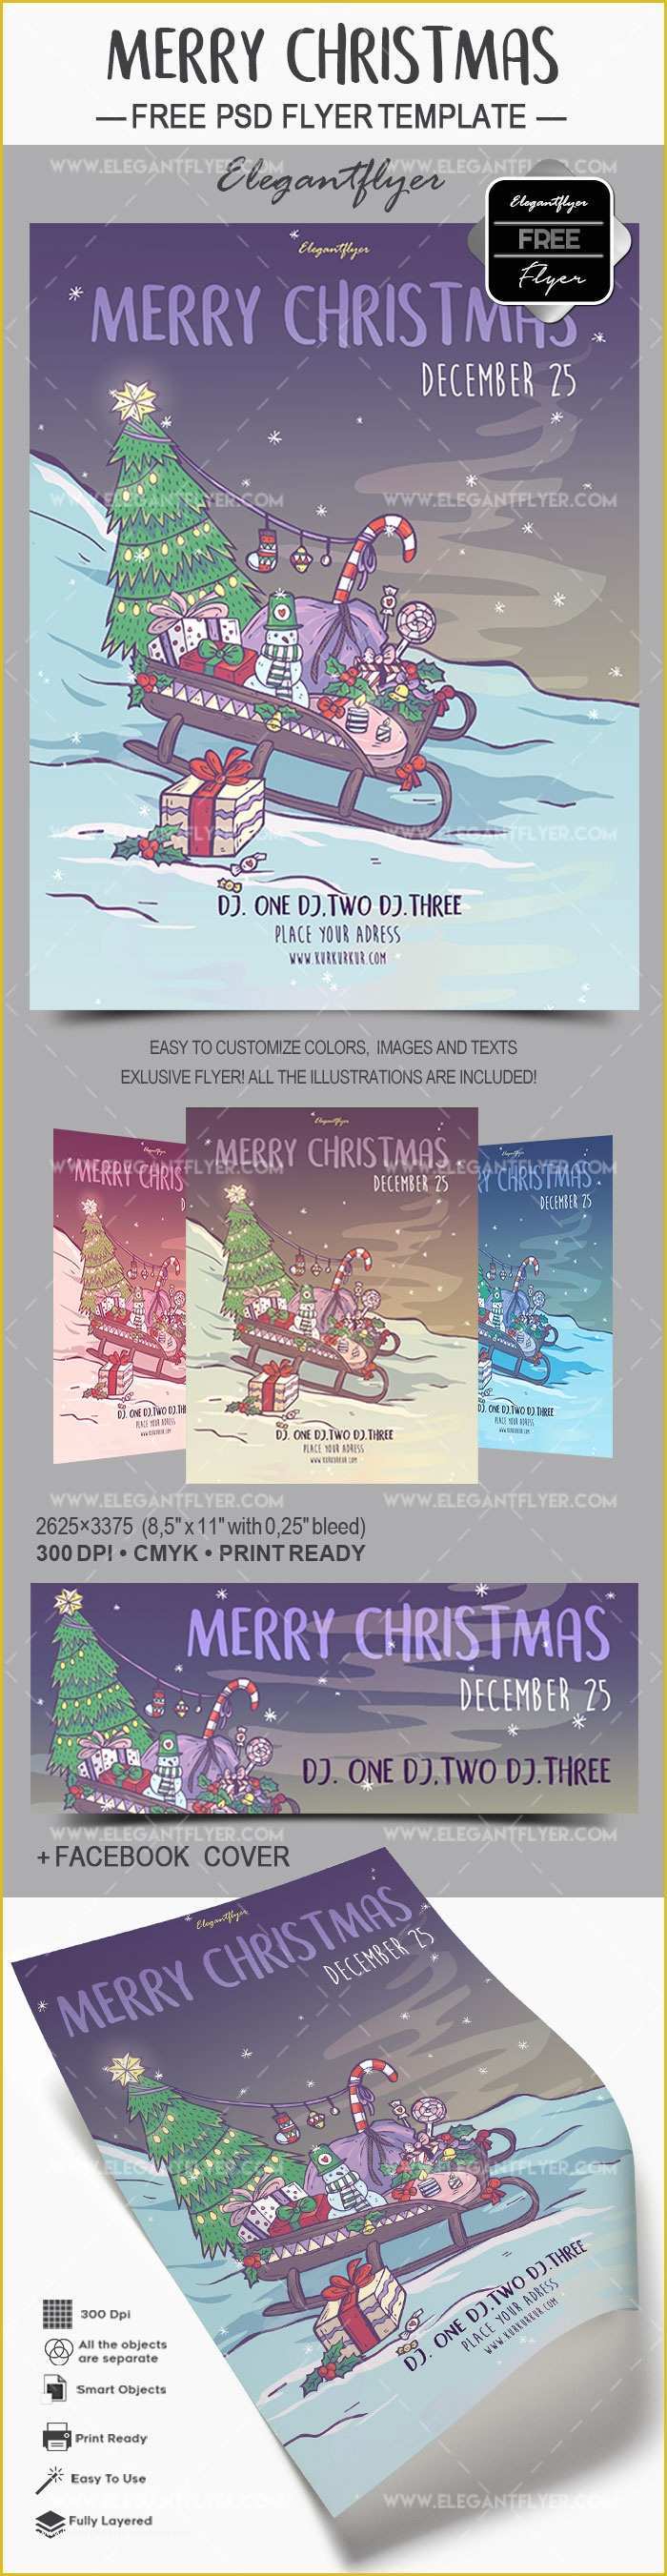 Free Christmas Flyer Templates Psd Of Merry Christmas – Free Flyer Psd Template – by Elegantflyer